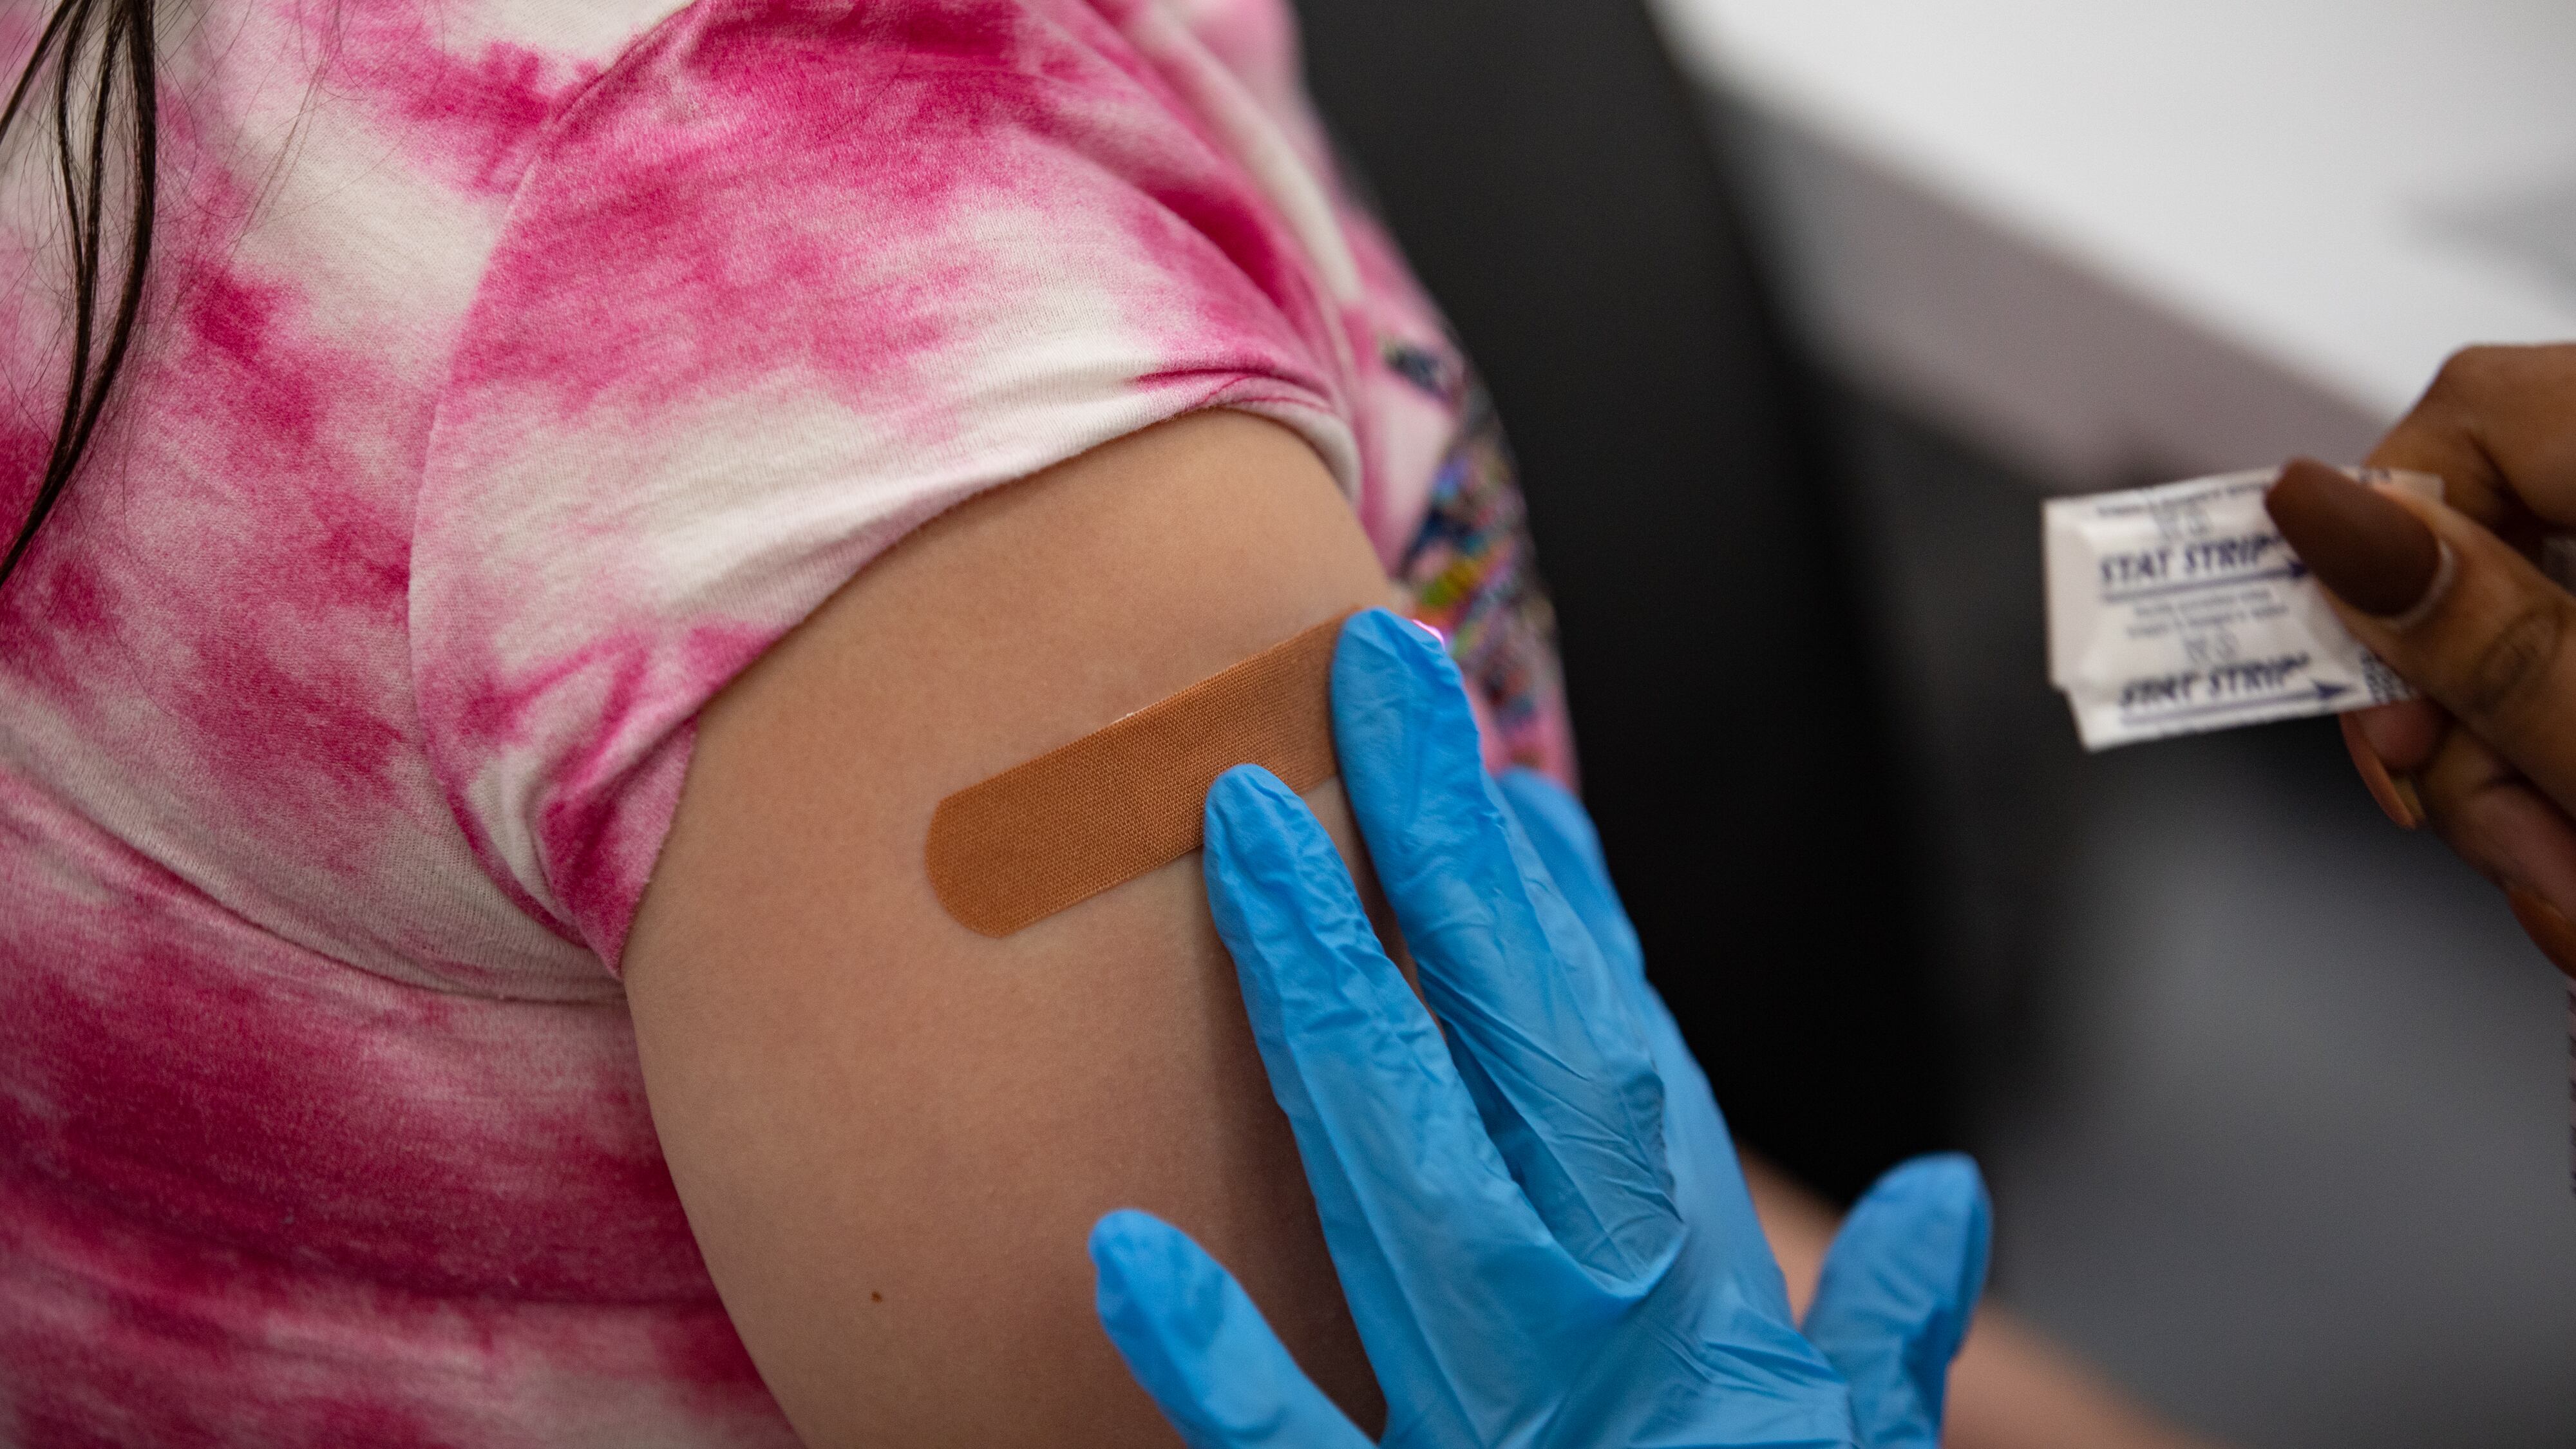 A gloved hand applies a flesh-colored bandaid to a child’s arm. The child is wearing a pink and white tie-dyed shirt rolled up to the shoulder. A few strands of dark hair are visible on the child’s shoulder.